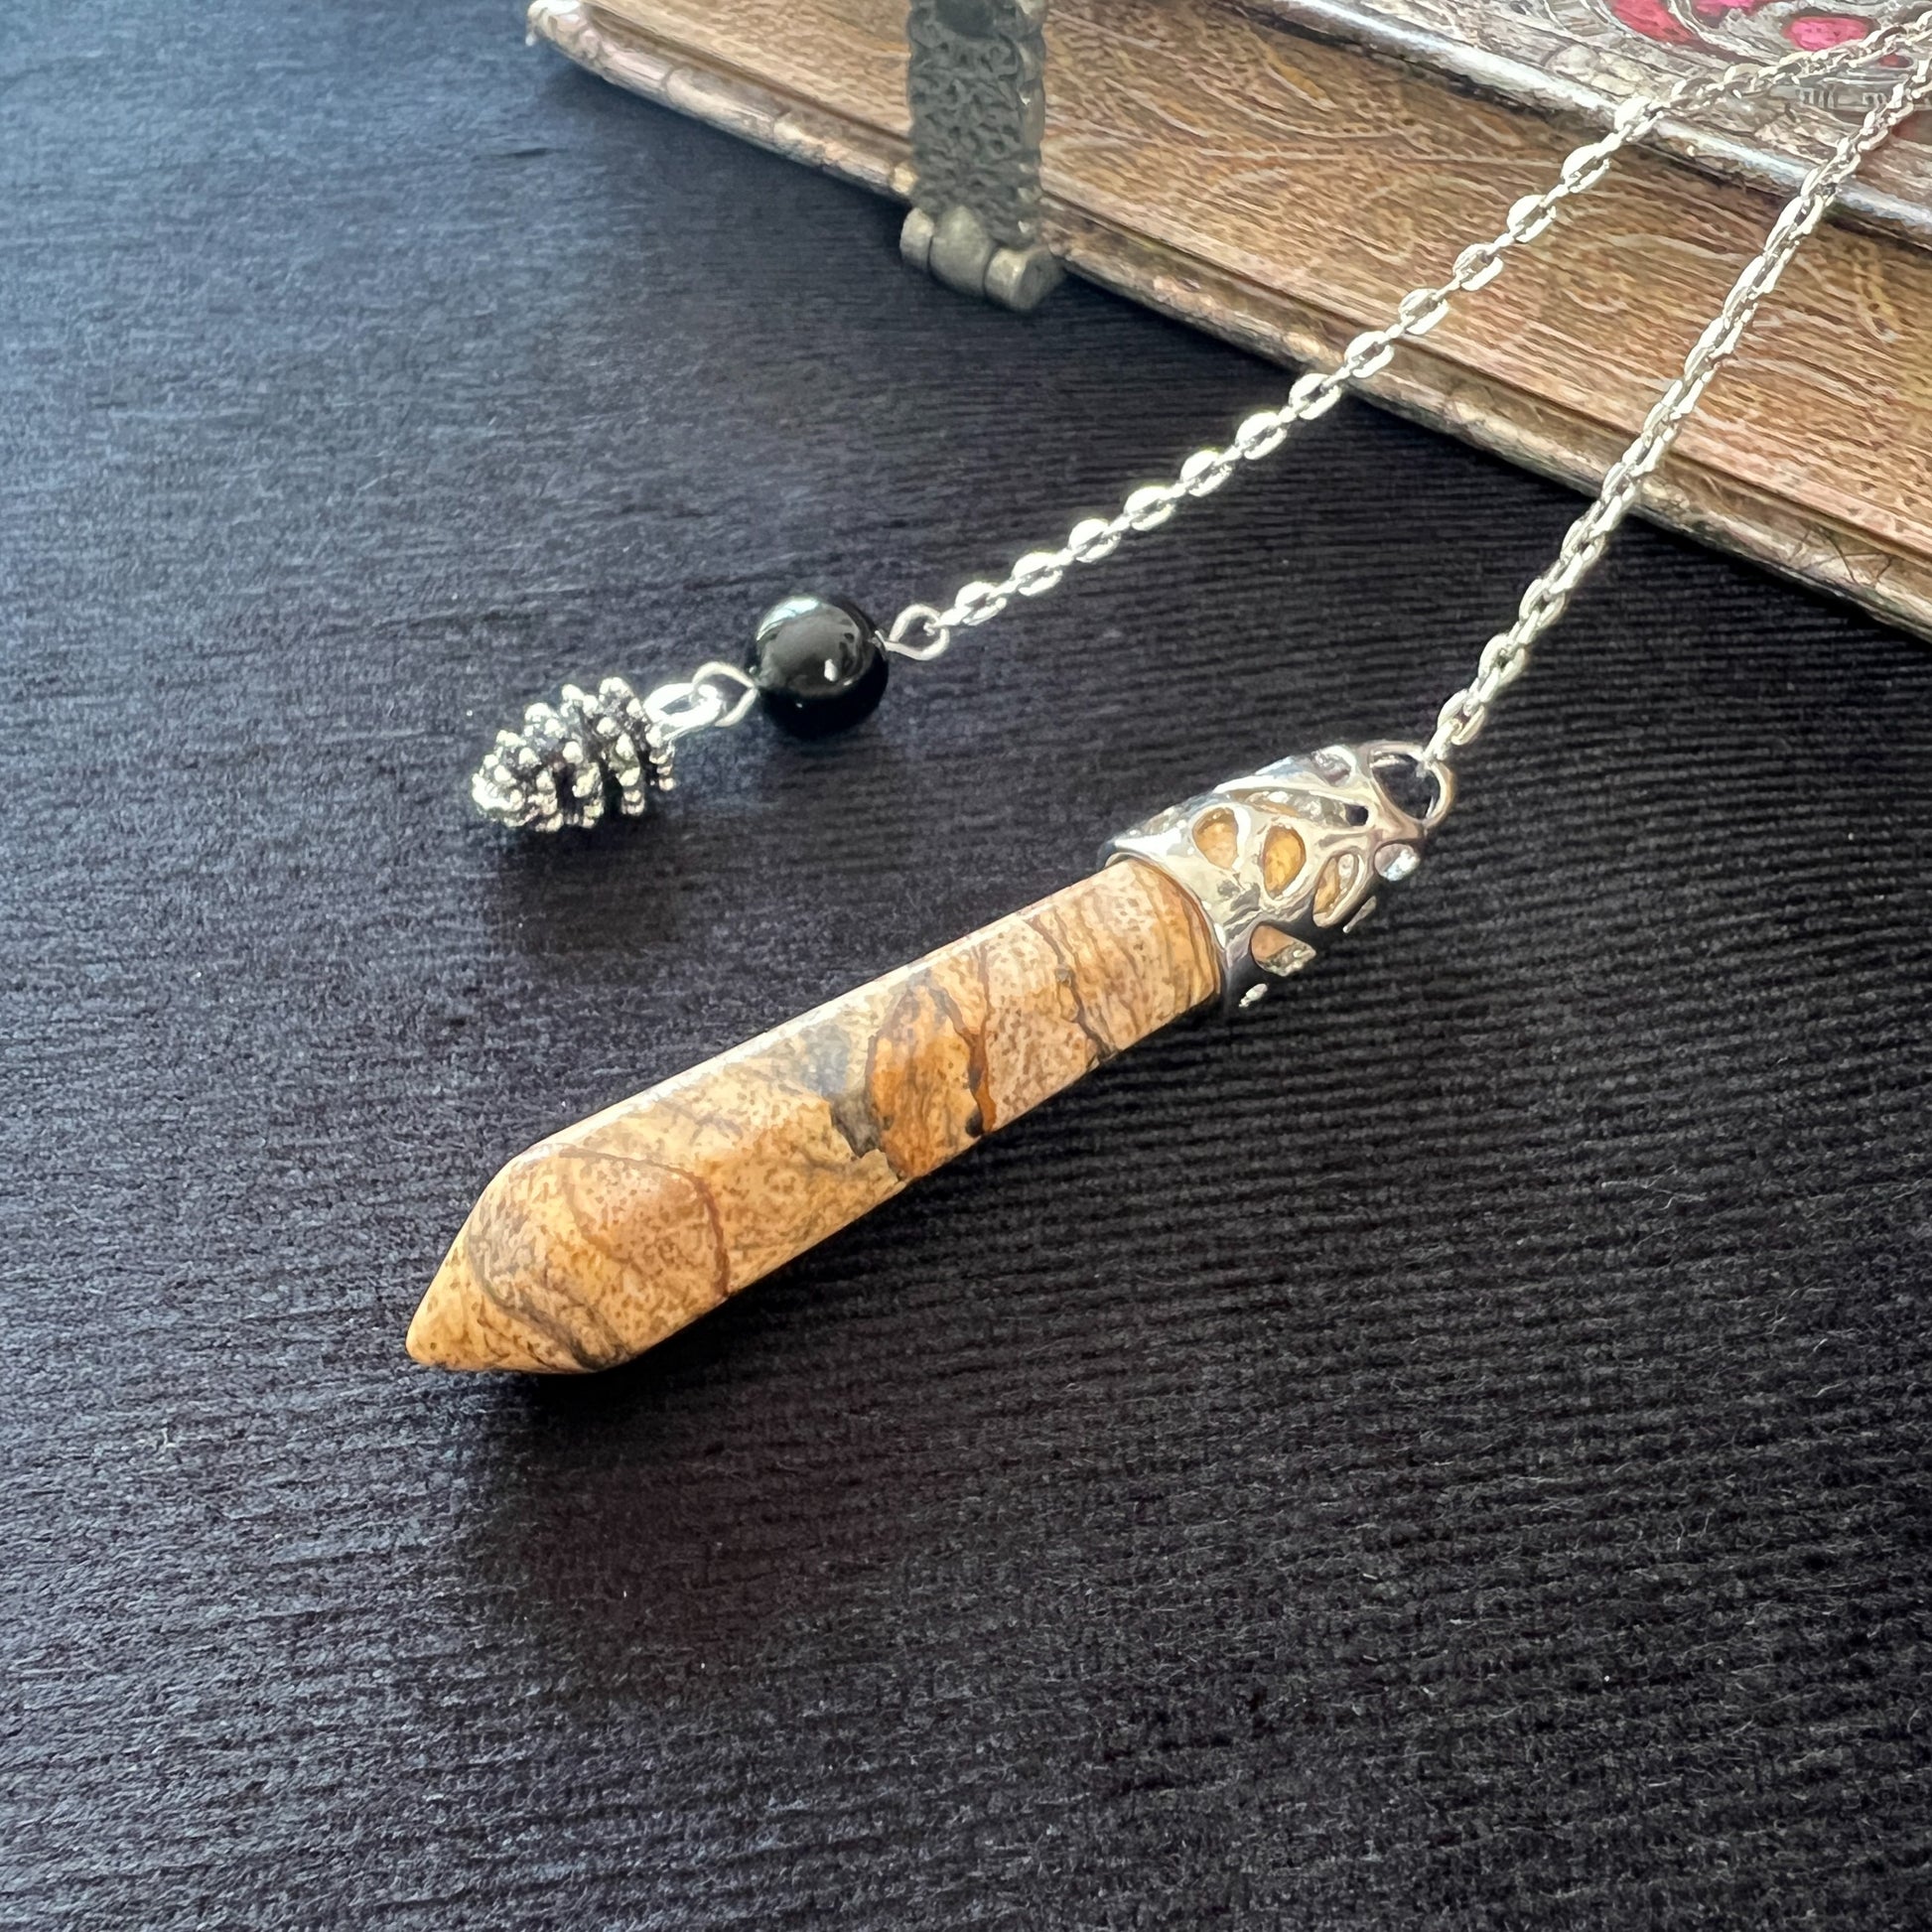 Gemstone divination pendulum picture jasper and obsidian with a pinecone spiritual charm dowsing tool